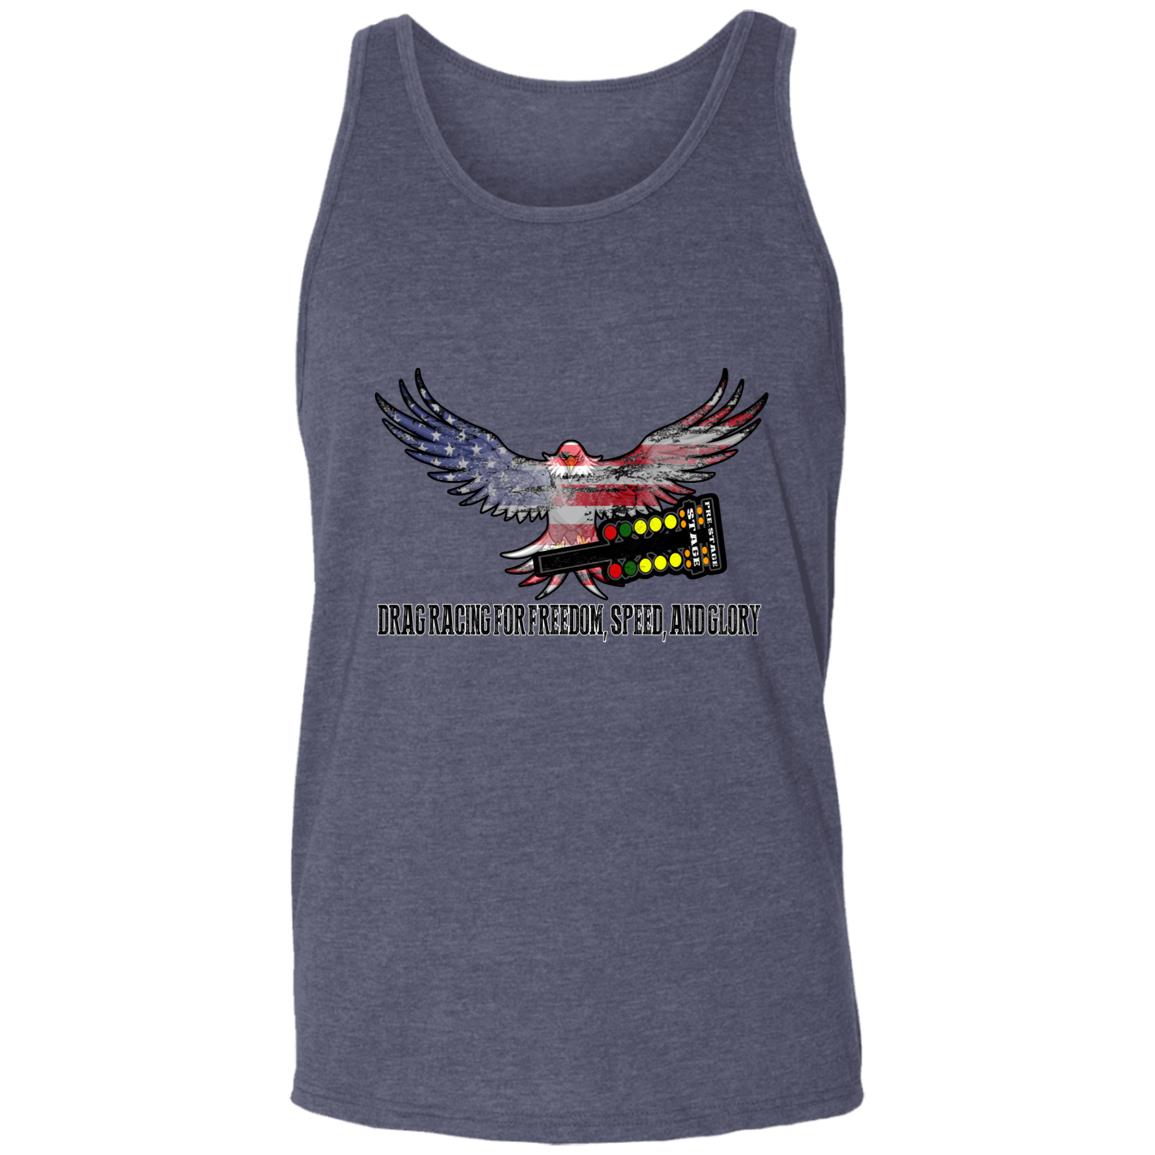 Drag Racing for Freedom, Speed, and Glory Unisex Tank